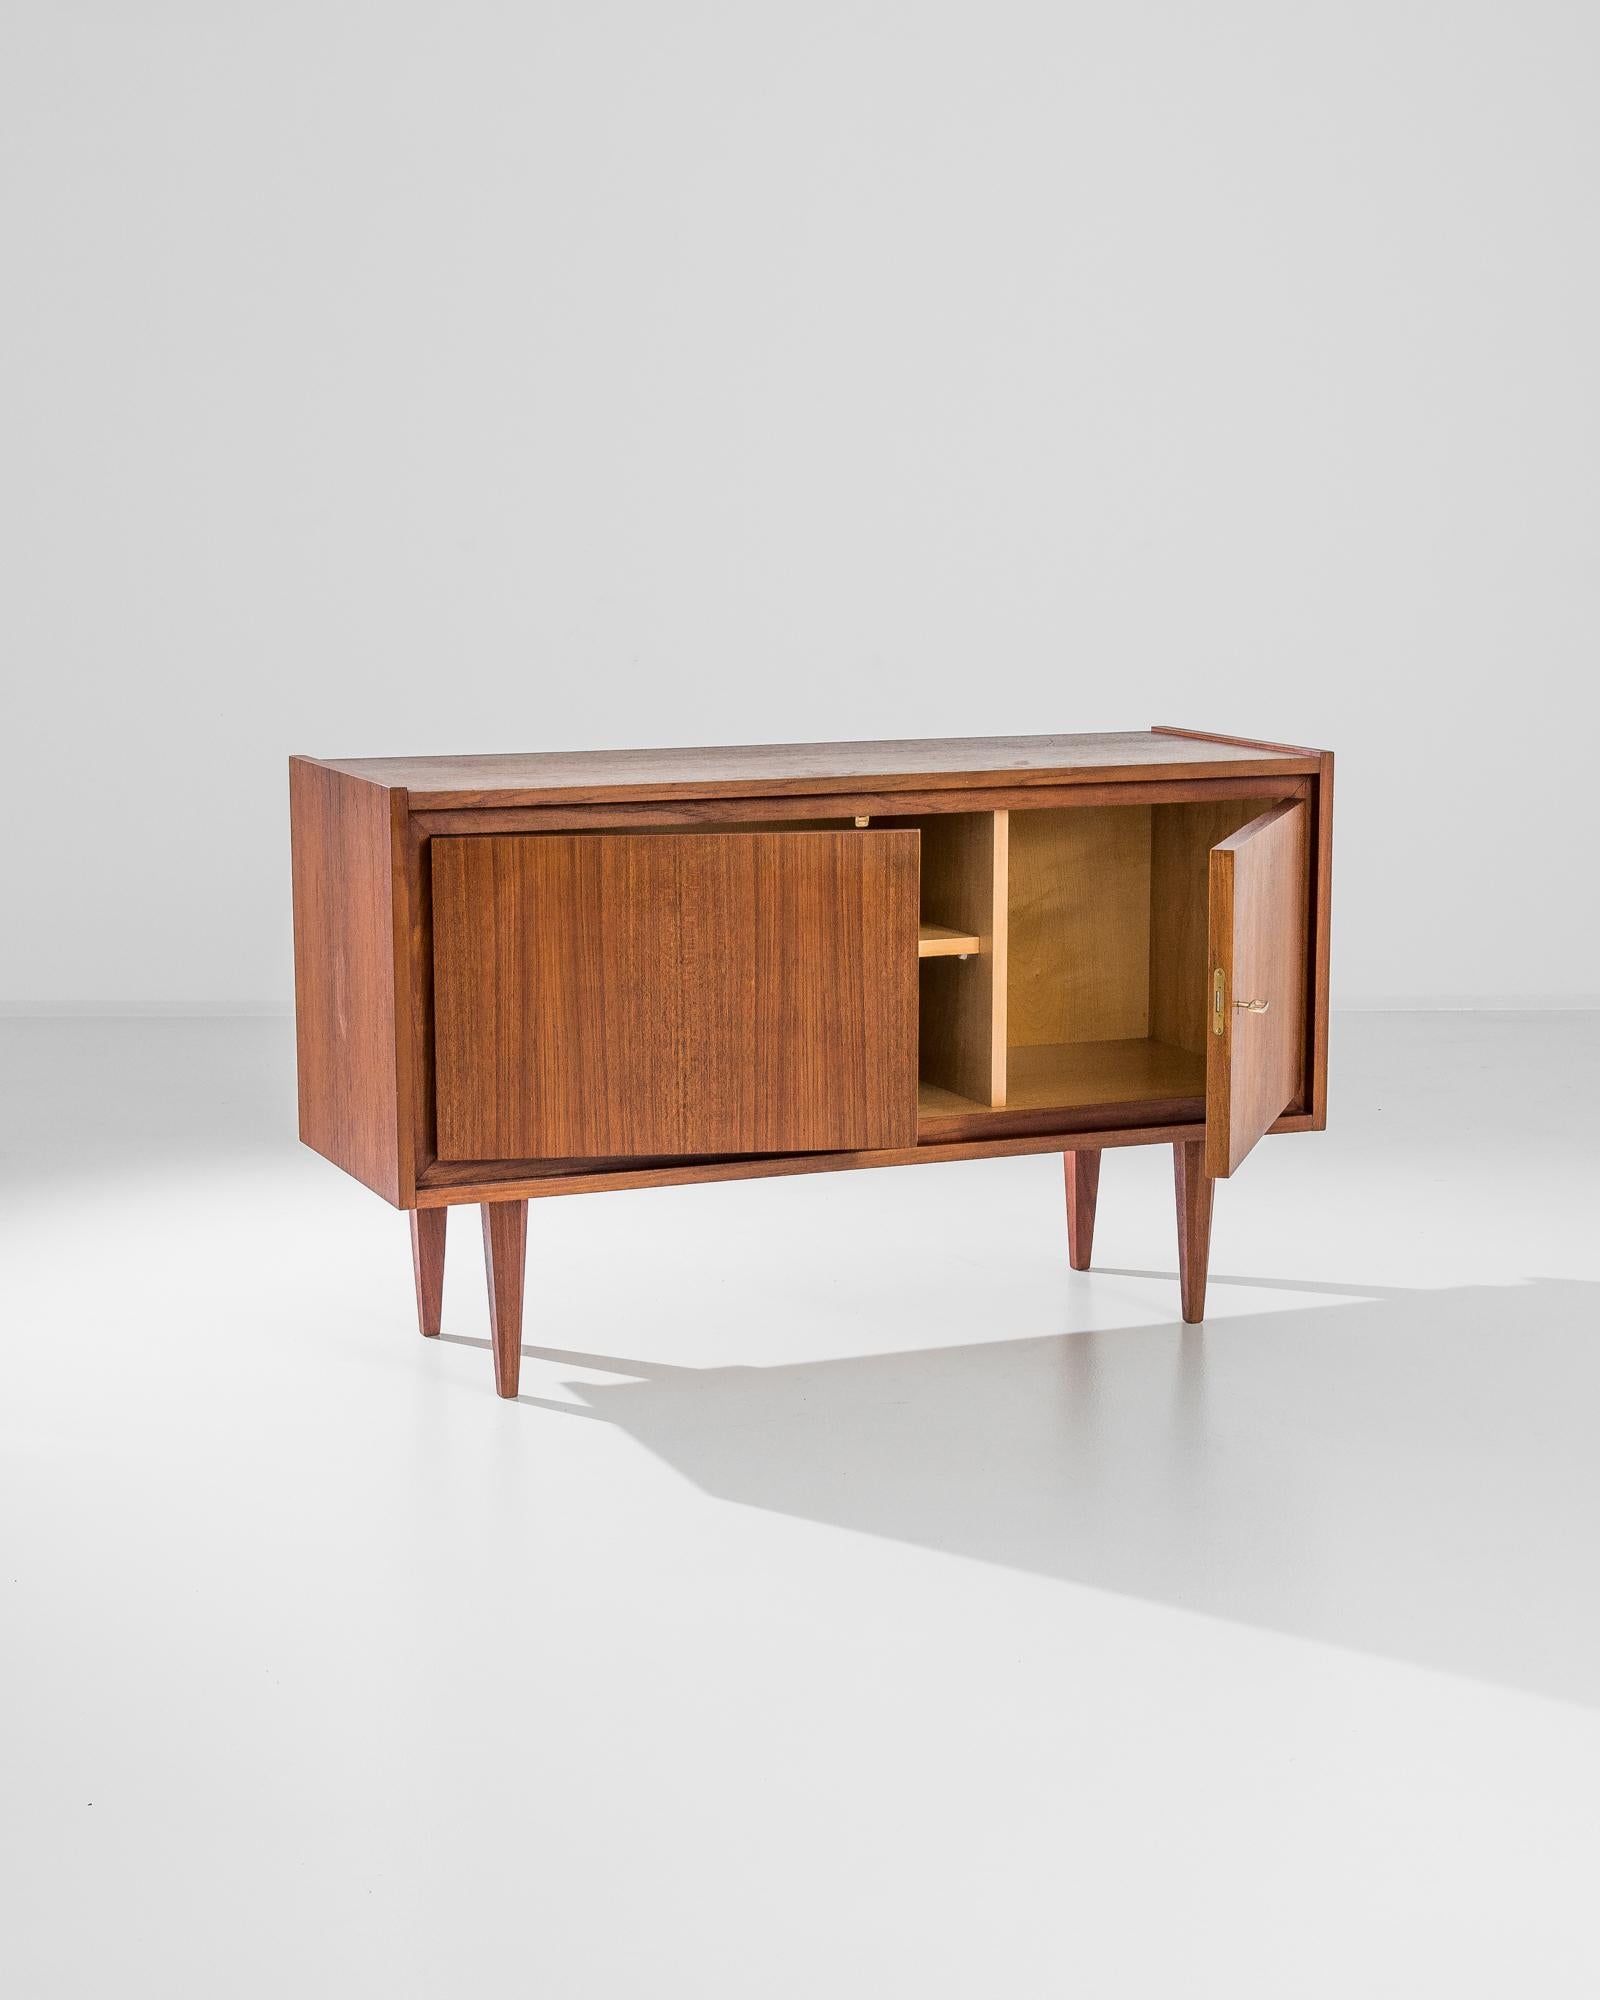 This 1960s German Teak Sideboard is a vintage treasure that offers a blend of utility and sleek design. Constructed from teak, known for its durability and rich grain, the sideboard features a smooth surface and a warm, honeyed finish that has been